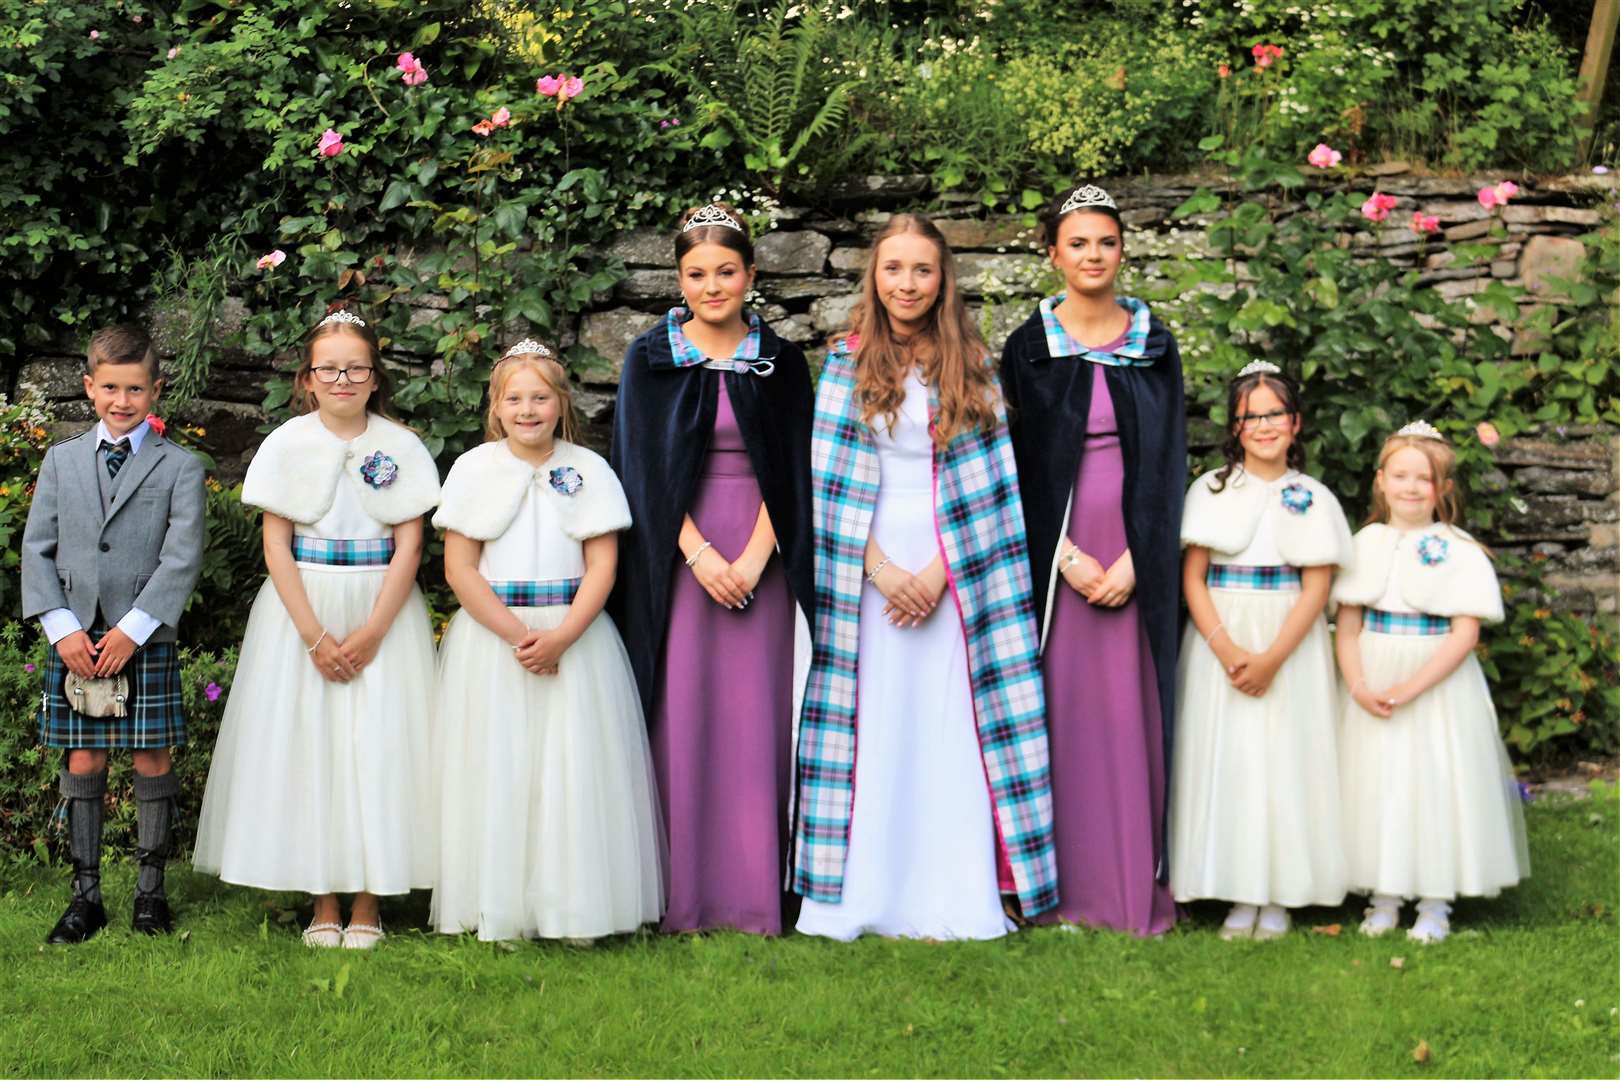 Wick Gala Queen Abby Dunbar and her court. Picture: Eswyl Fell